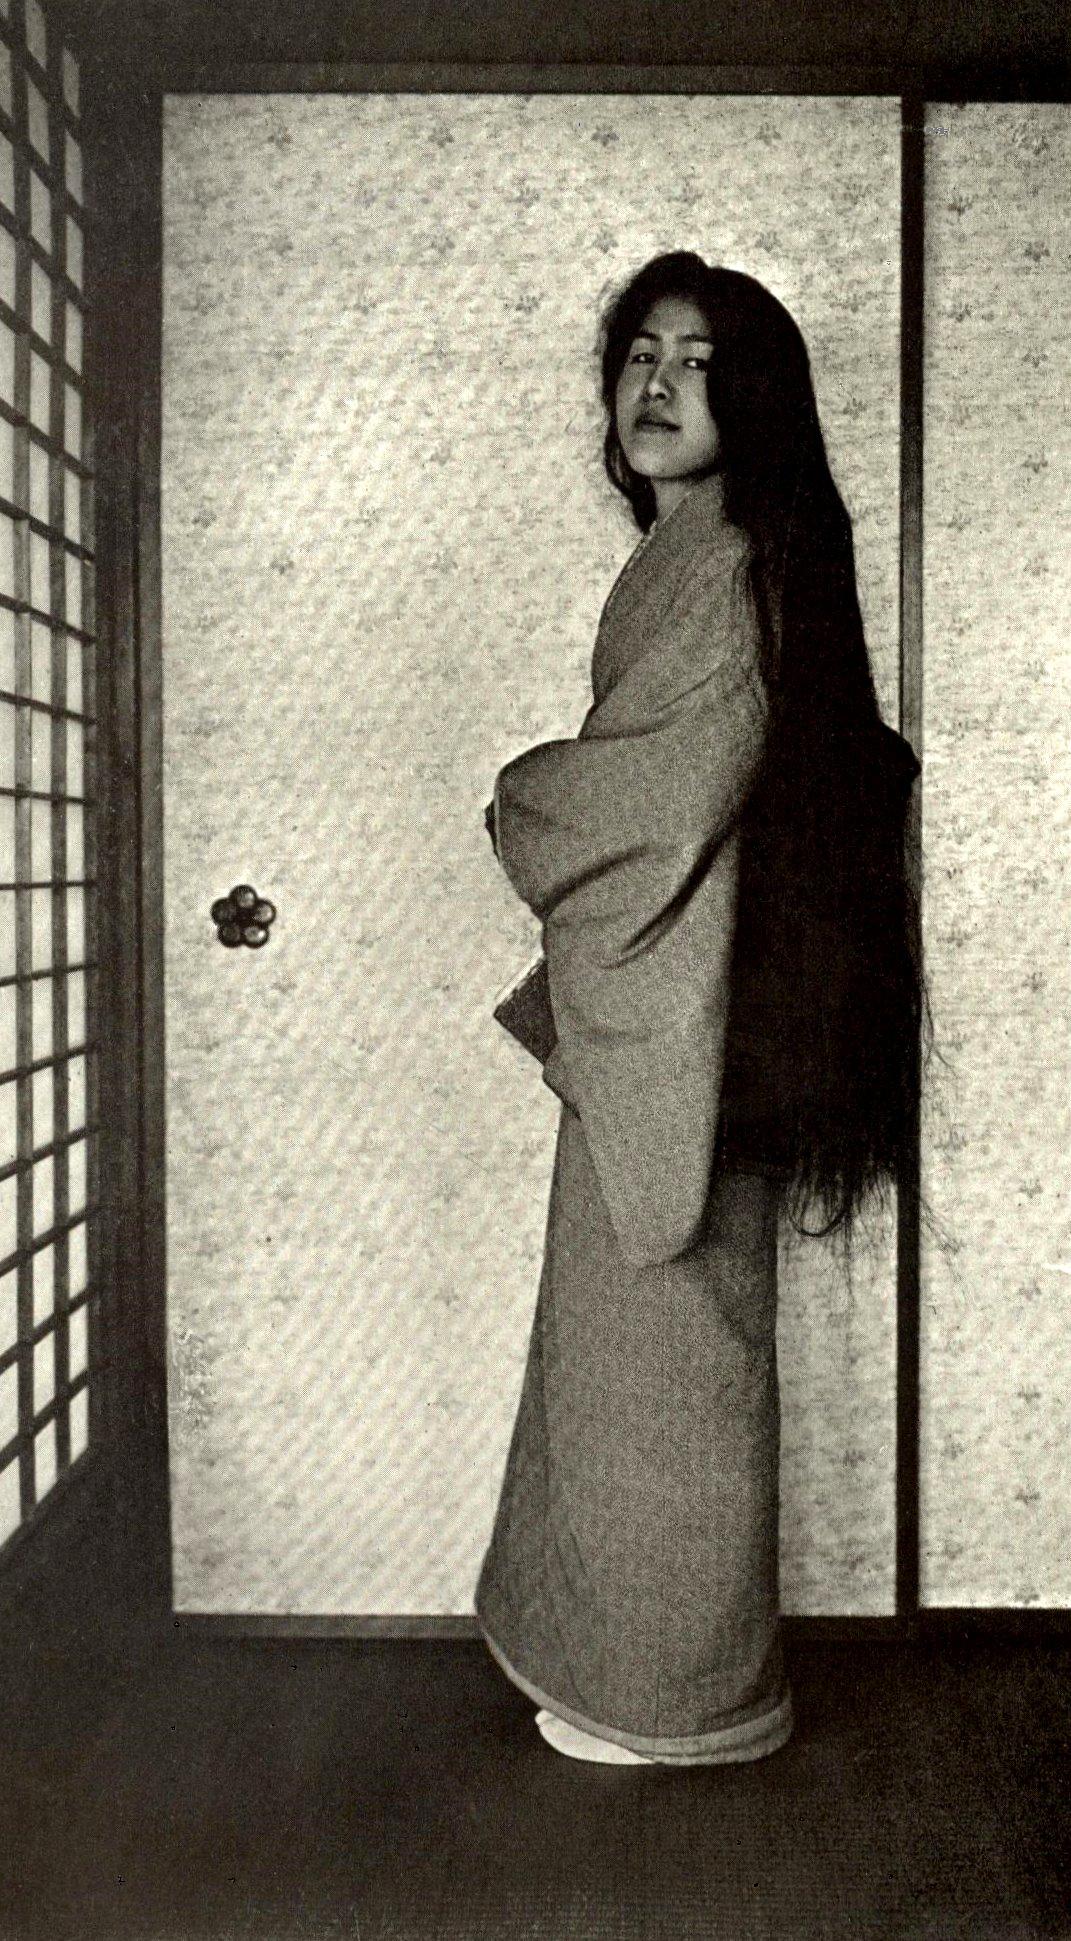 A Geisha after washing her hair and before styling it, c. 1905.